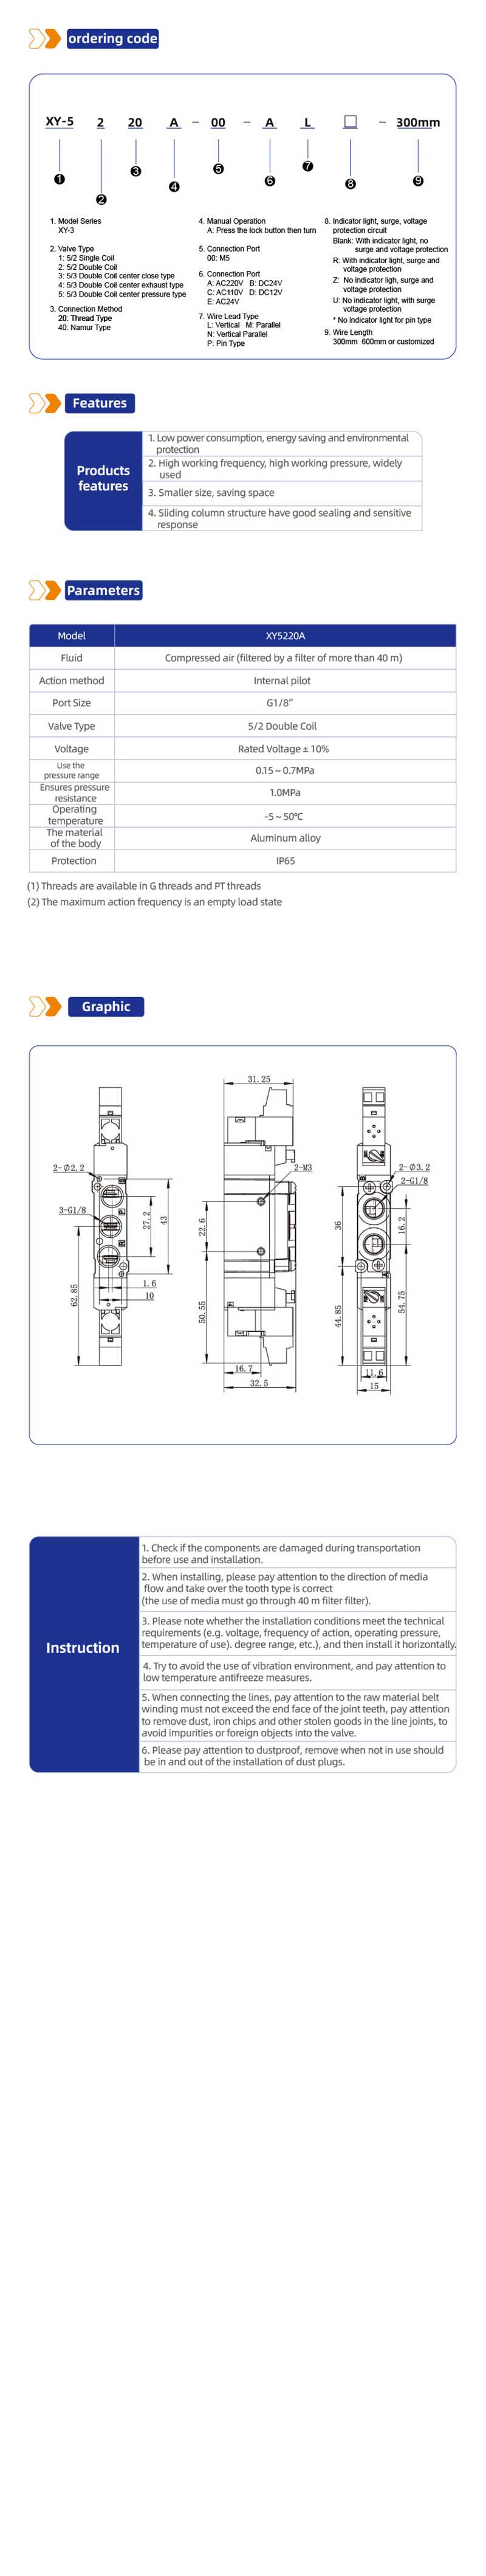 XY5220A Directional Control Valve